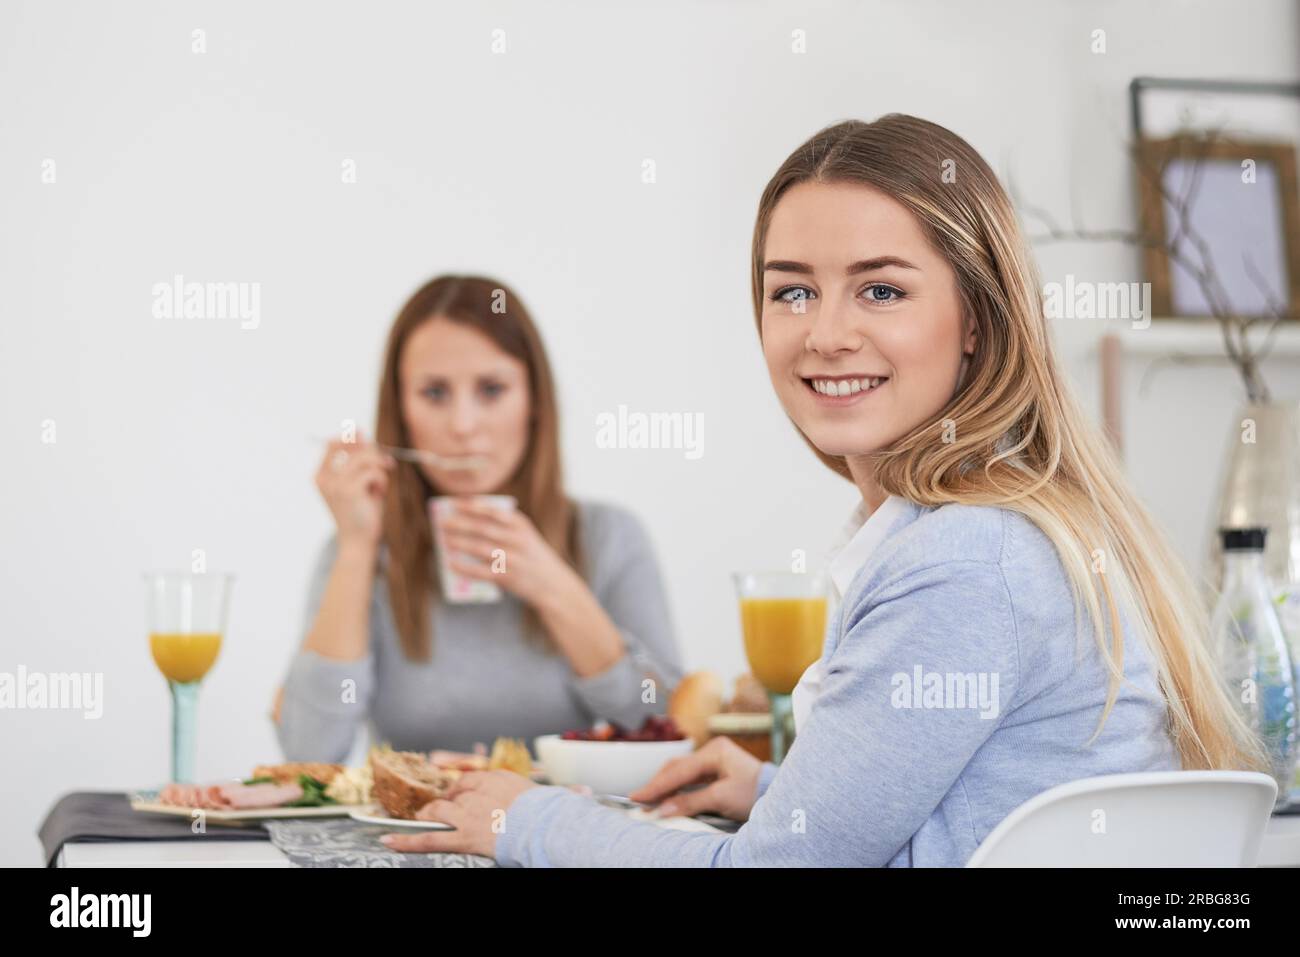 Pretty young teenage woman with a vivacious smile sitting at a table with her best friend enjoying breakfast and turning to smile at the camera Stock Photo